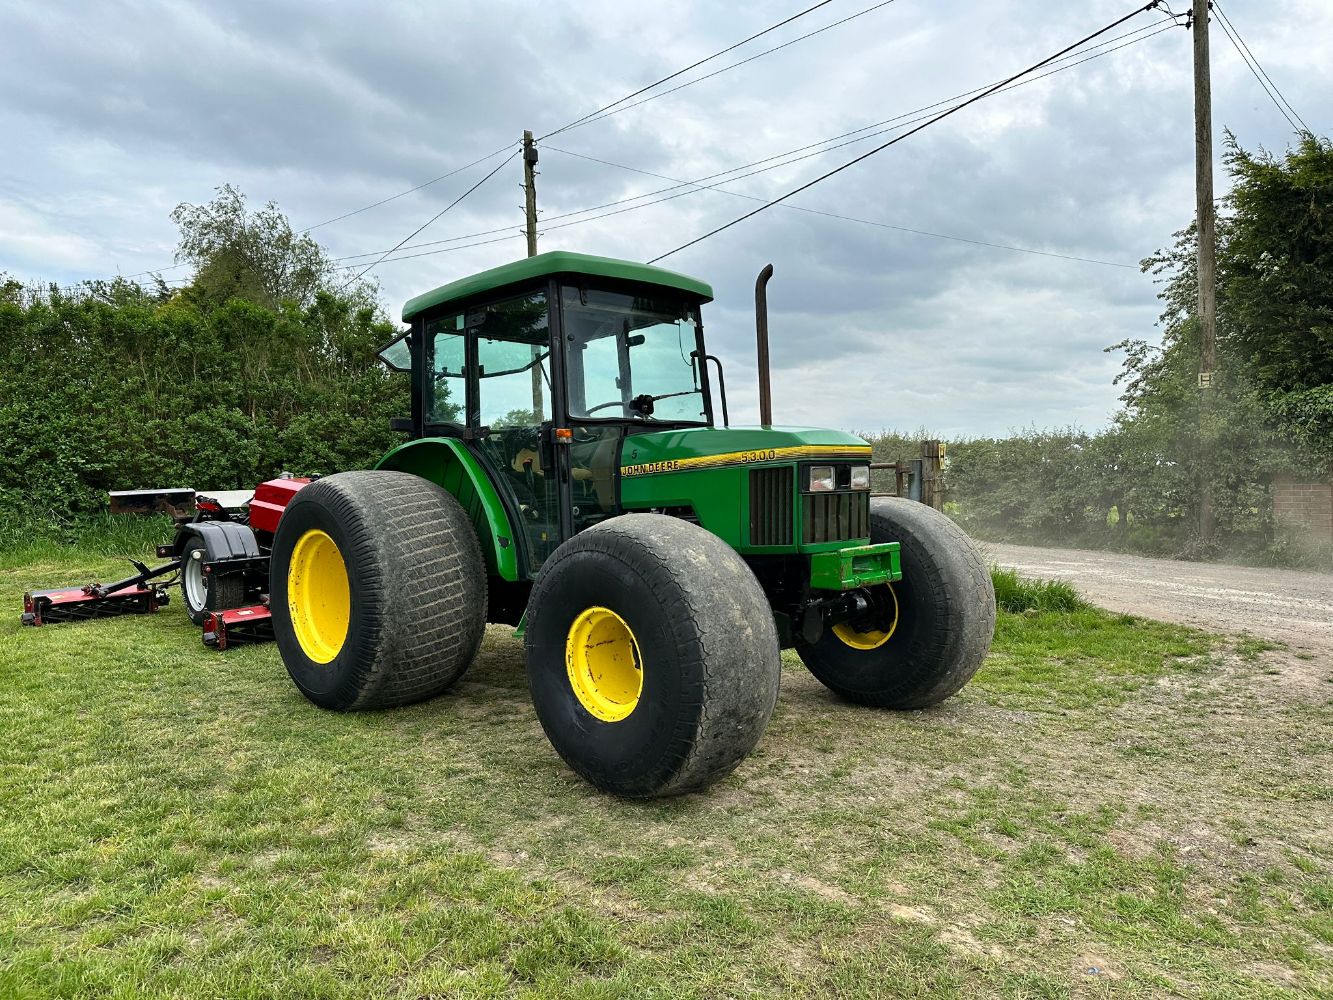 MONDAY 11AM! JOHN DEERE 5300 4WD TRACTOR, MANITOU, TEREX, BOMAG, PLYMOUTH PROWLER, EV VEHICLES, TRACTORS, MOWERS, VANS & MUCH MORE!